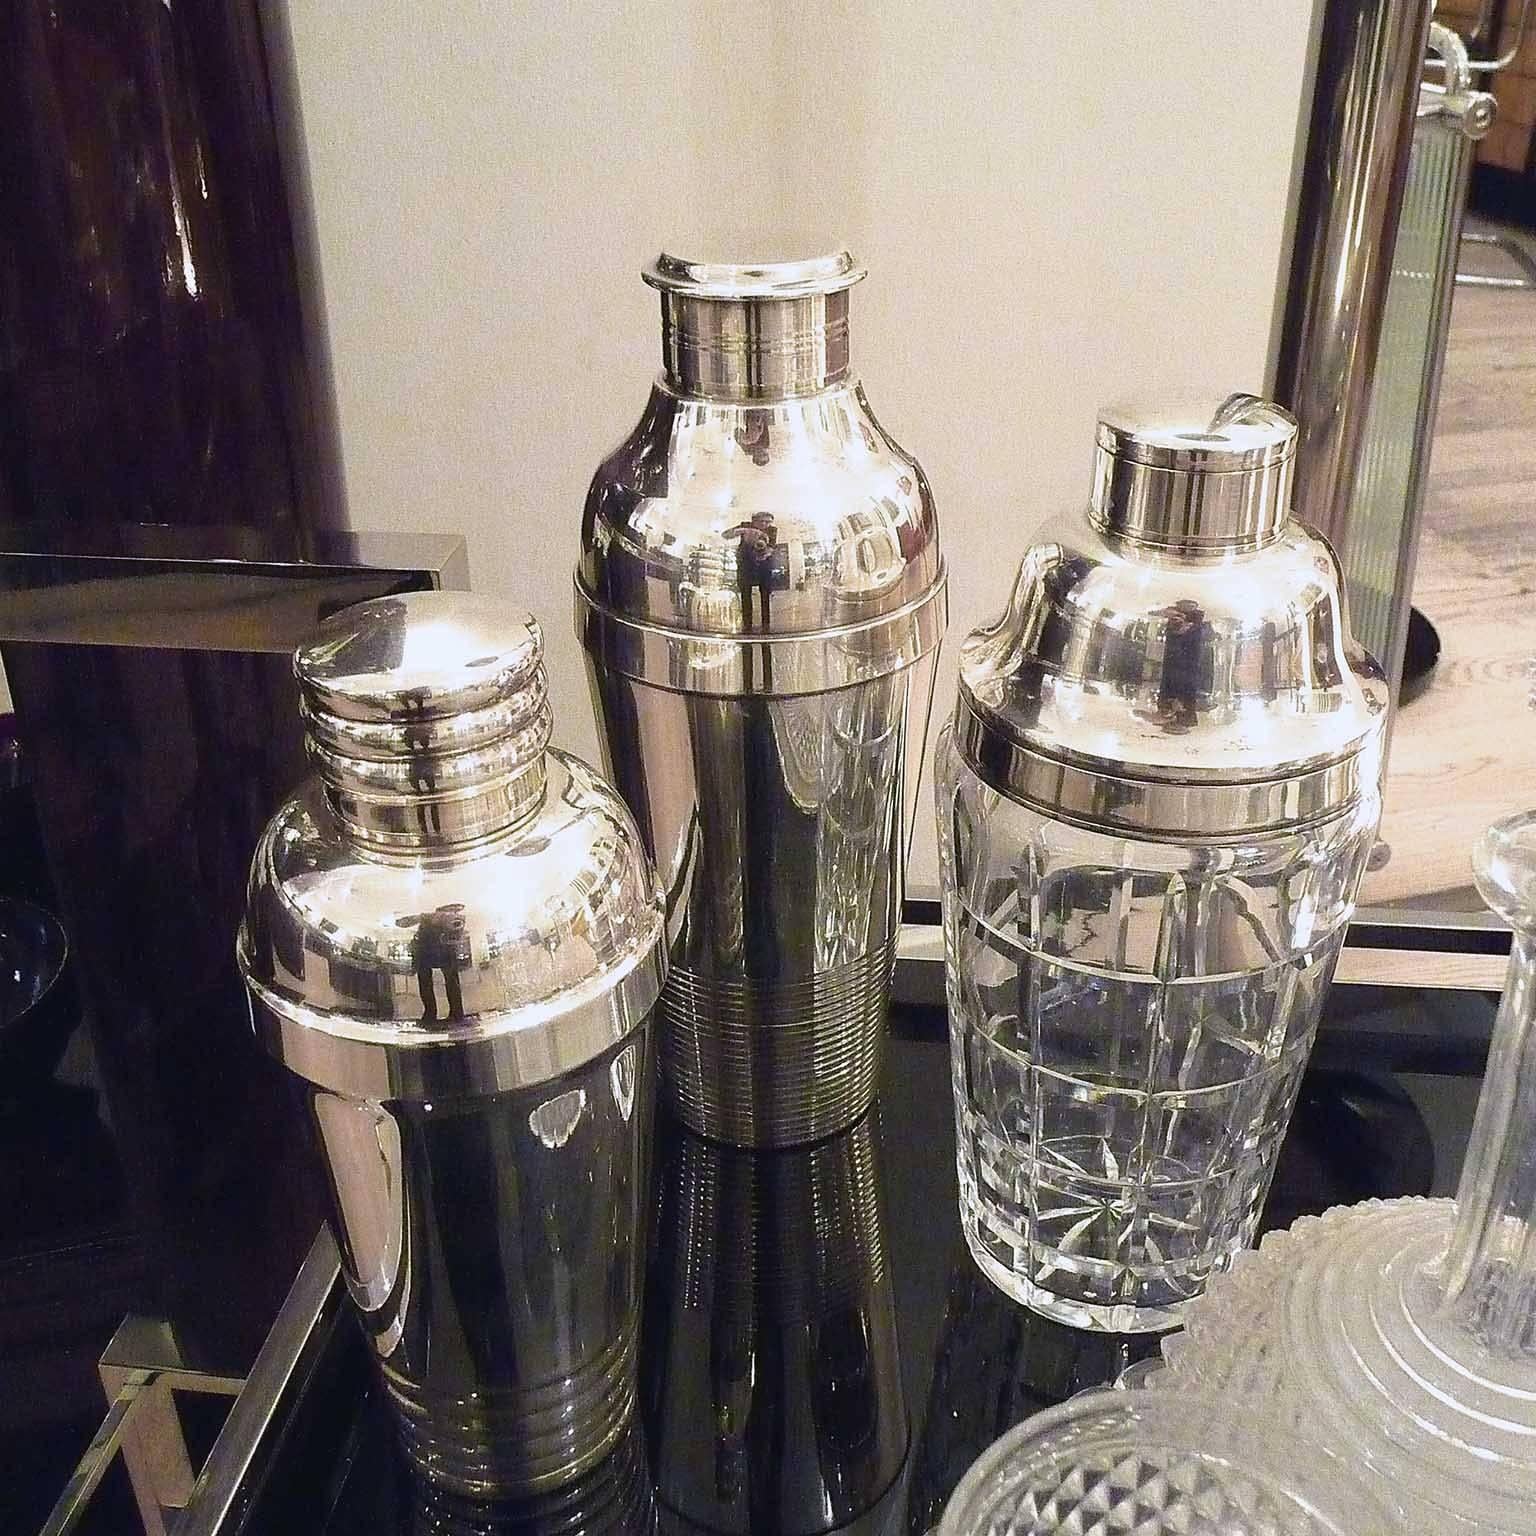 Very rare cocktail shaker by Saglier Freres.
Cut crystal and silvered metal.
Silversmith hallmark on the cap.

Dimensions:
Height 24cm (9,50 in.)

Condition:
Very good used condition.